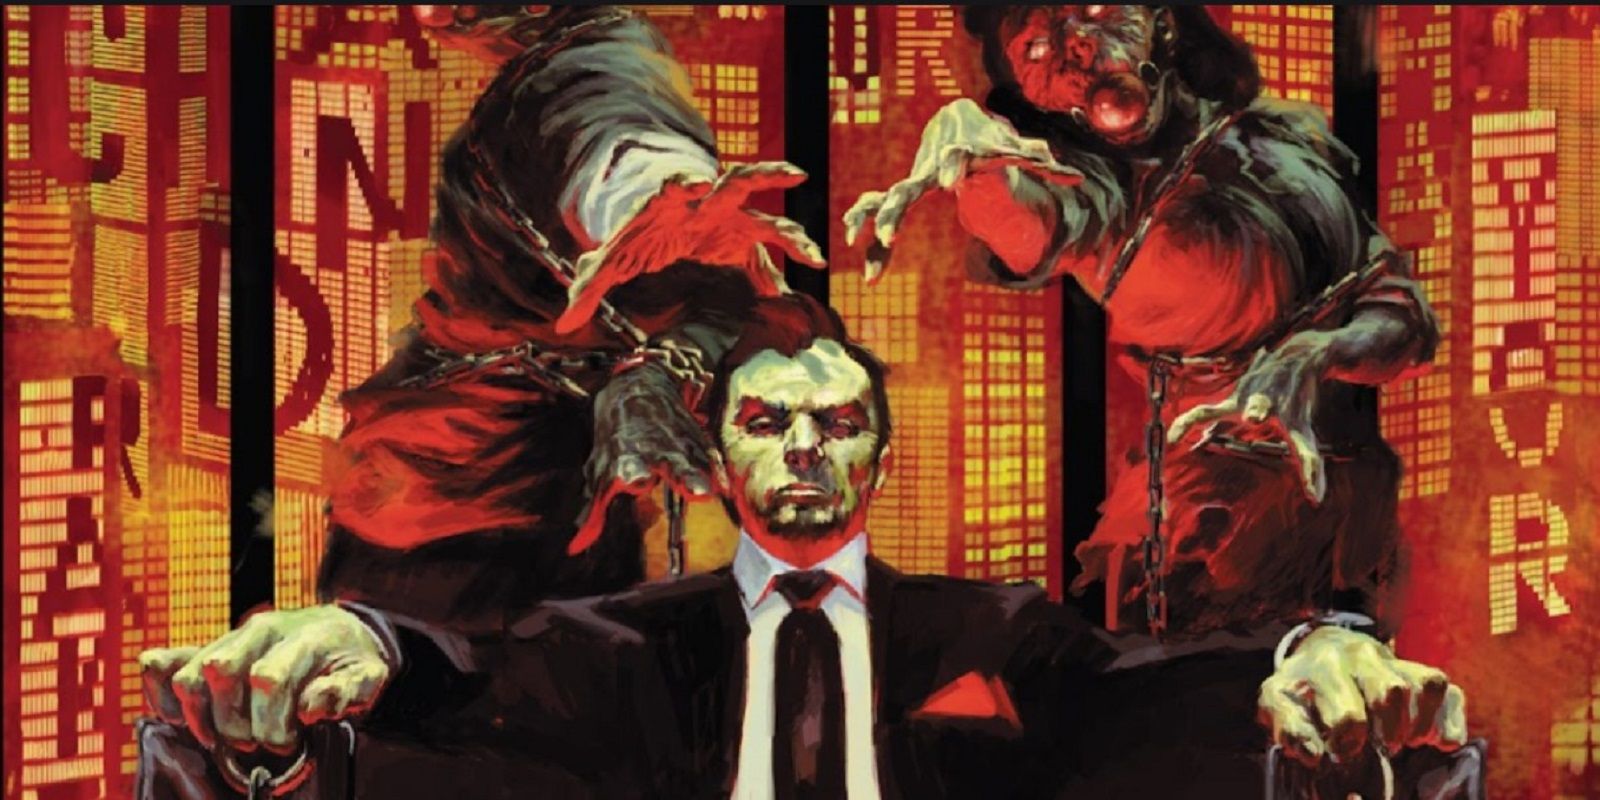 Empire of the Dead Cover with zombies reaching for a man in a suit